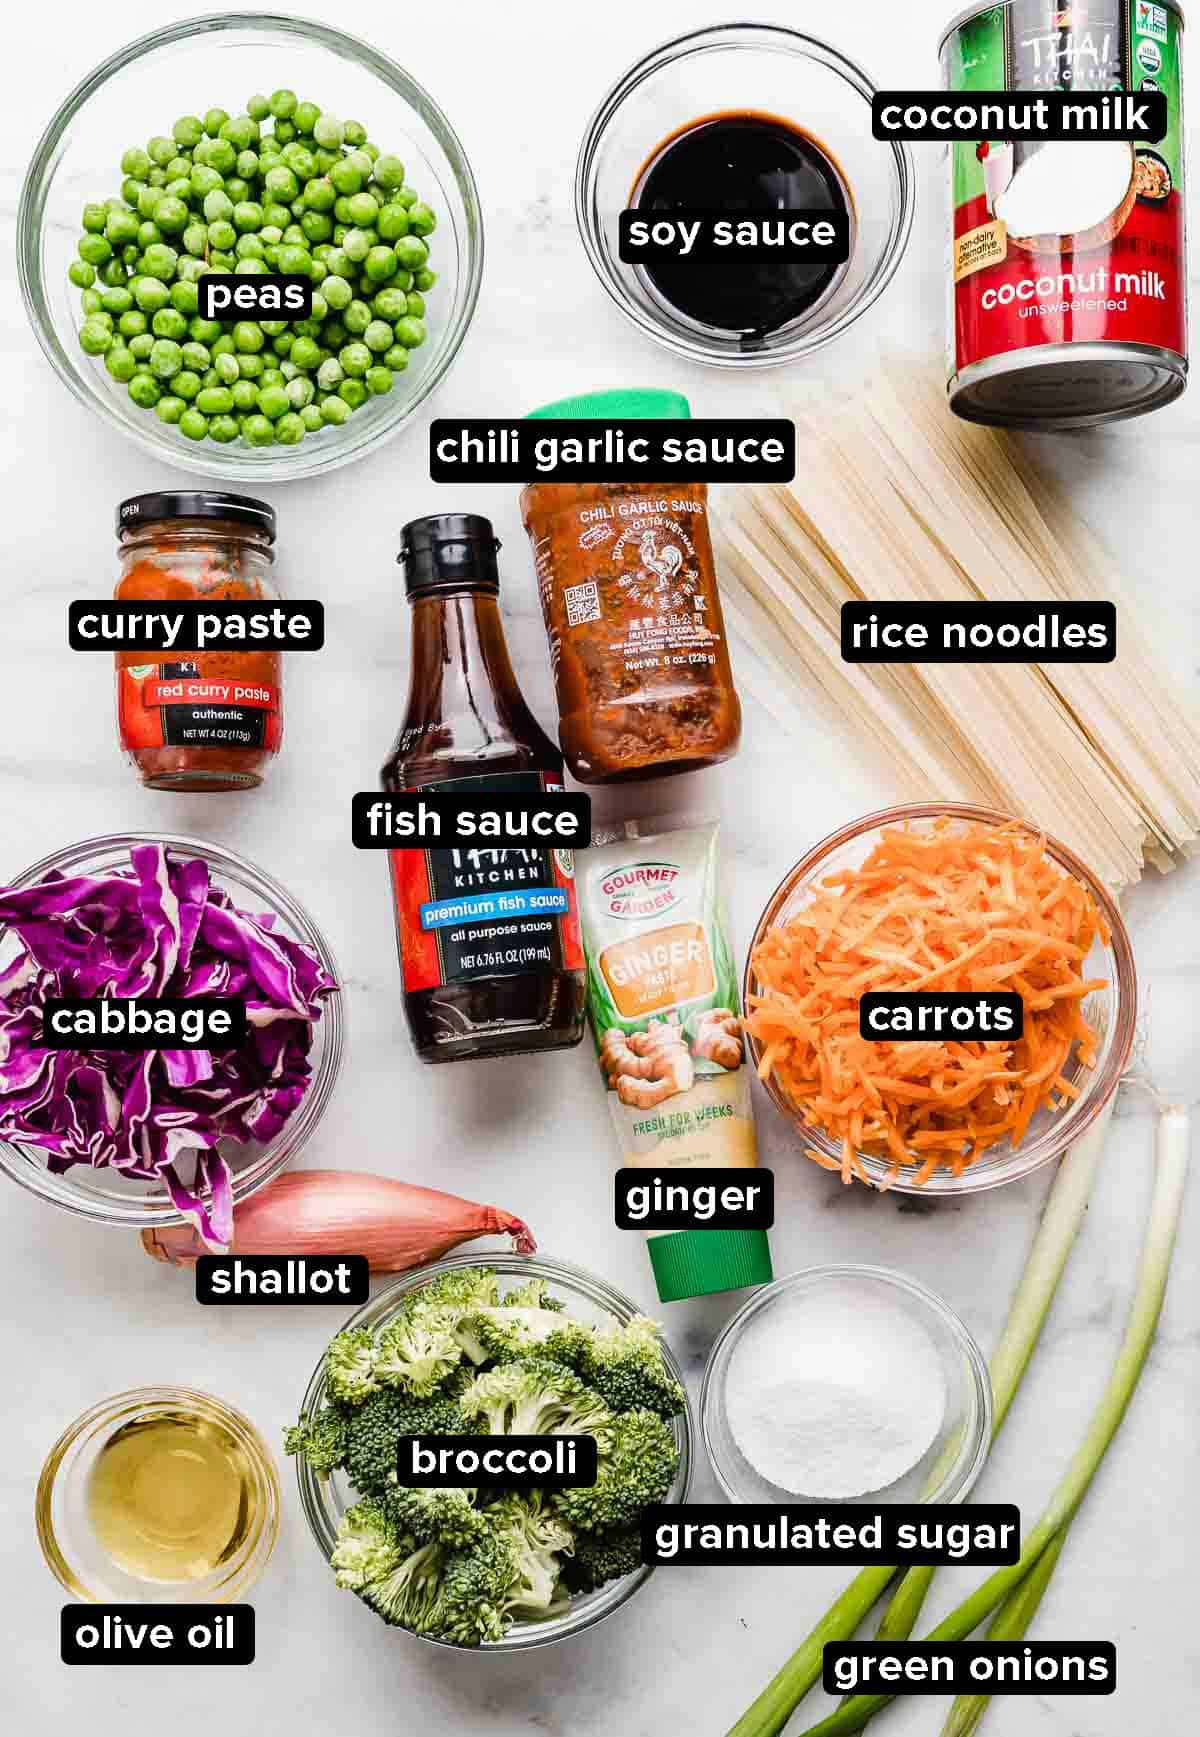 Coconut Curry Noodle Bowls ingredients on a white background: broccoli, rice noodles, curry paste, peas, carrots, purple cabbage, soy sauce, coconut milk.